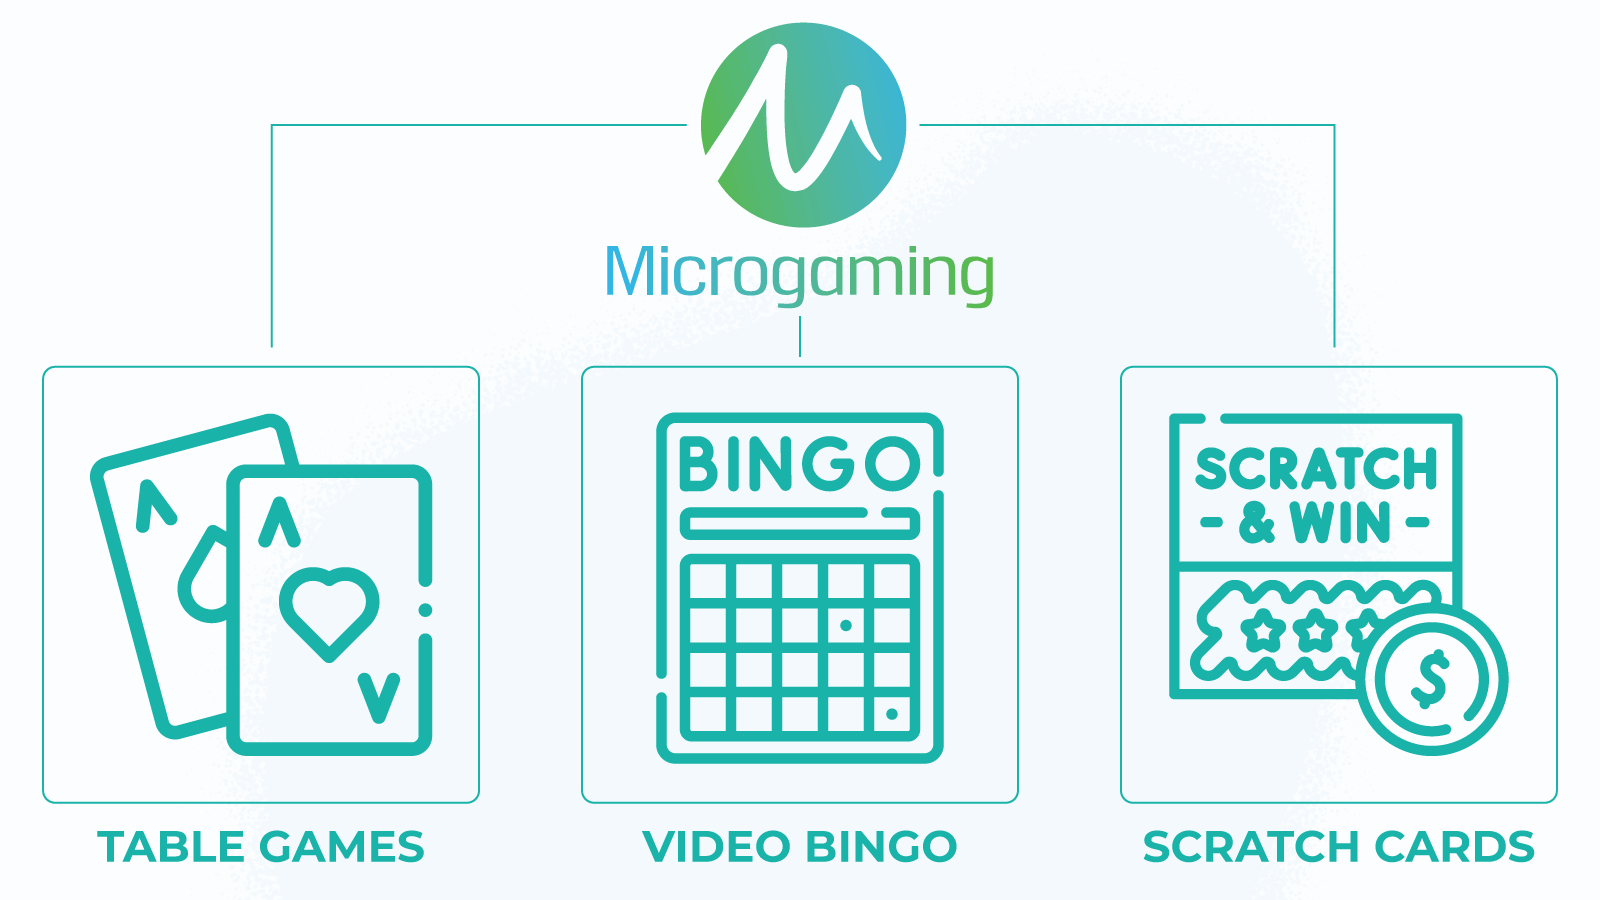 Other Microgaming Games